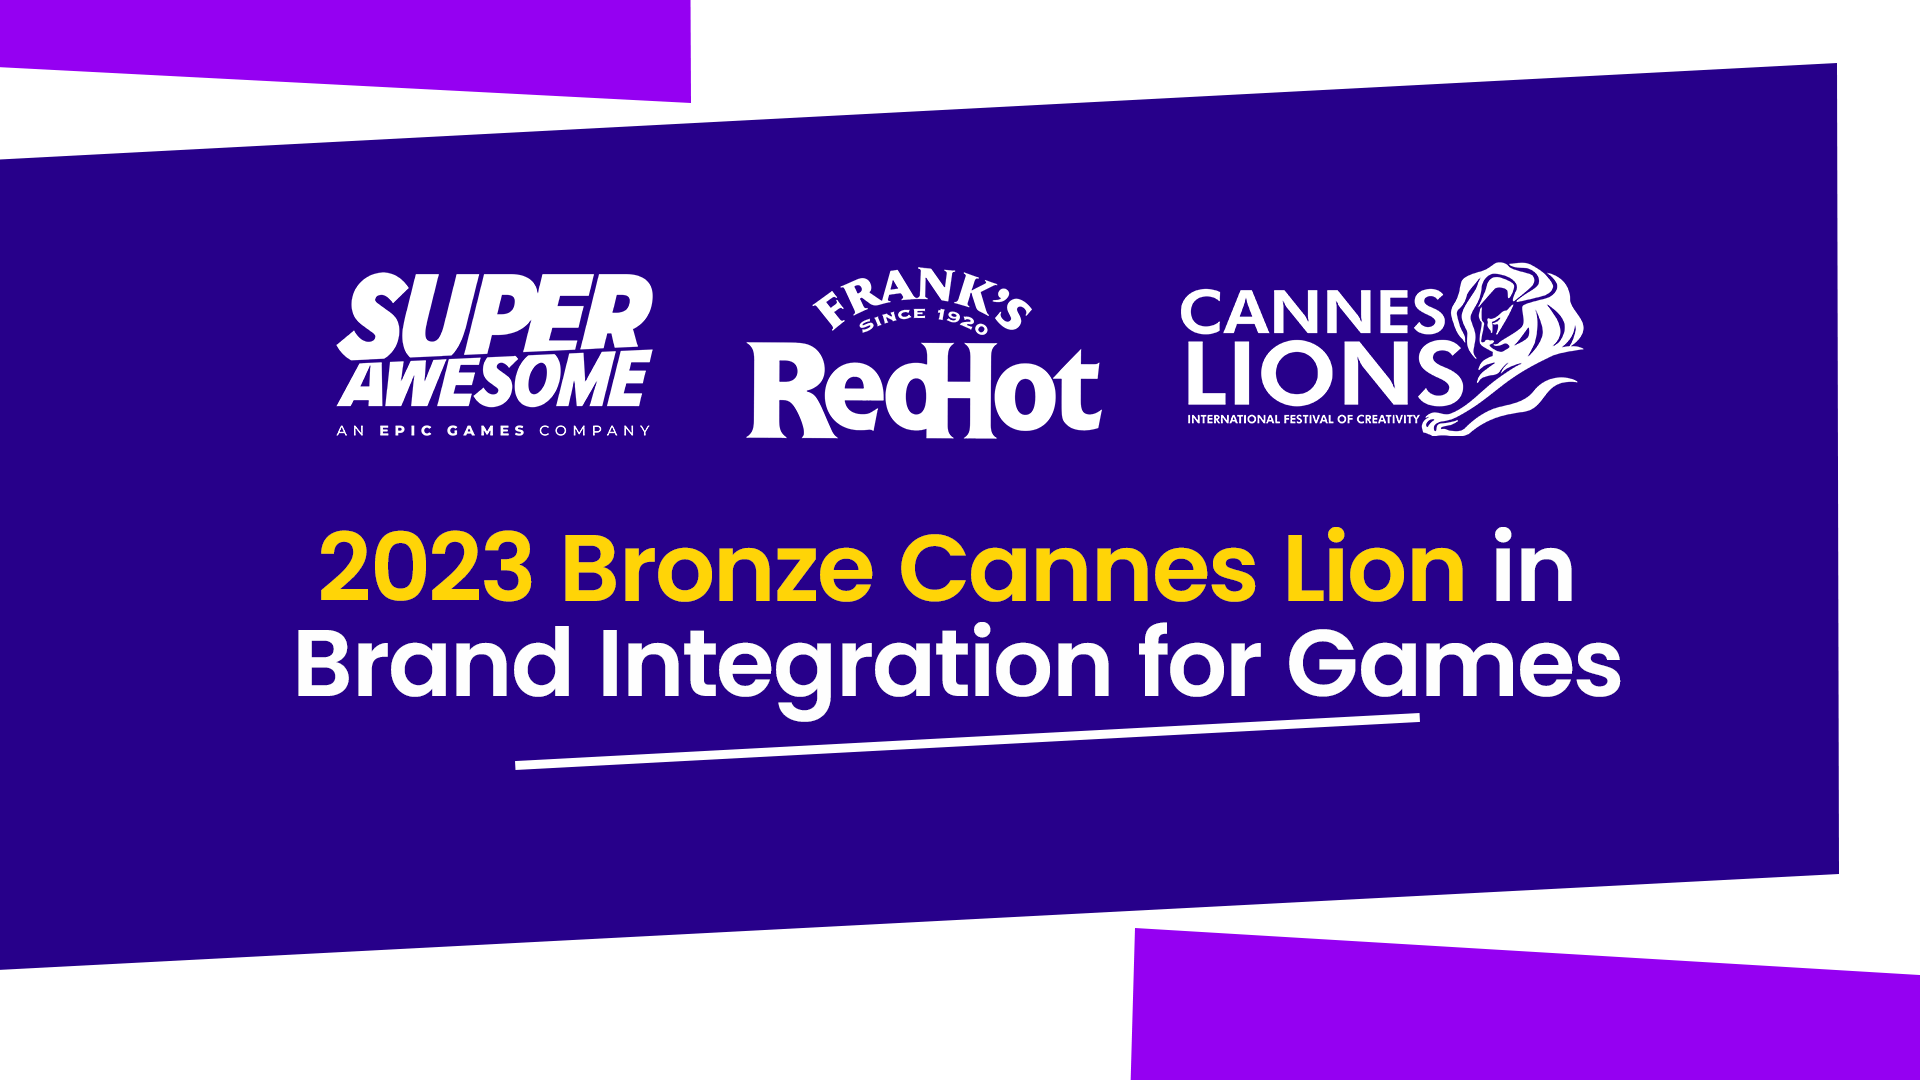 Frank’s RedHot and SuperAwesome Win Bronze Cannes Lion in Brand Integration for Games Category